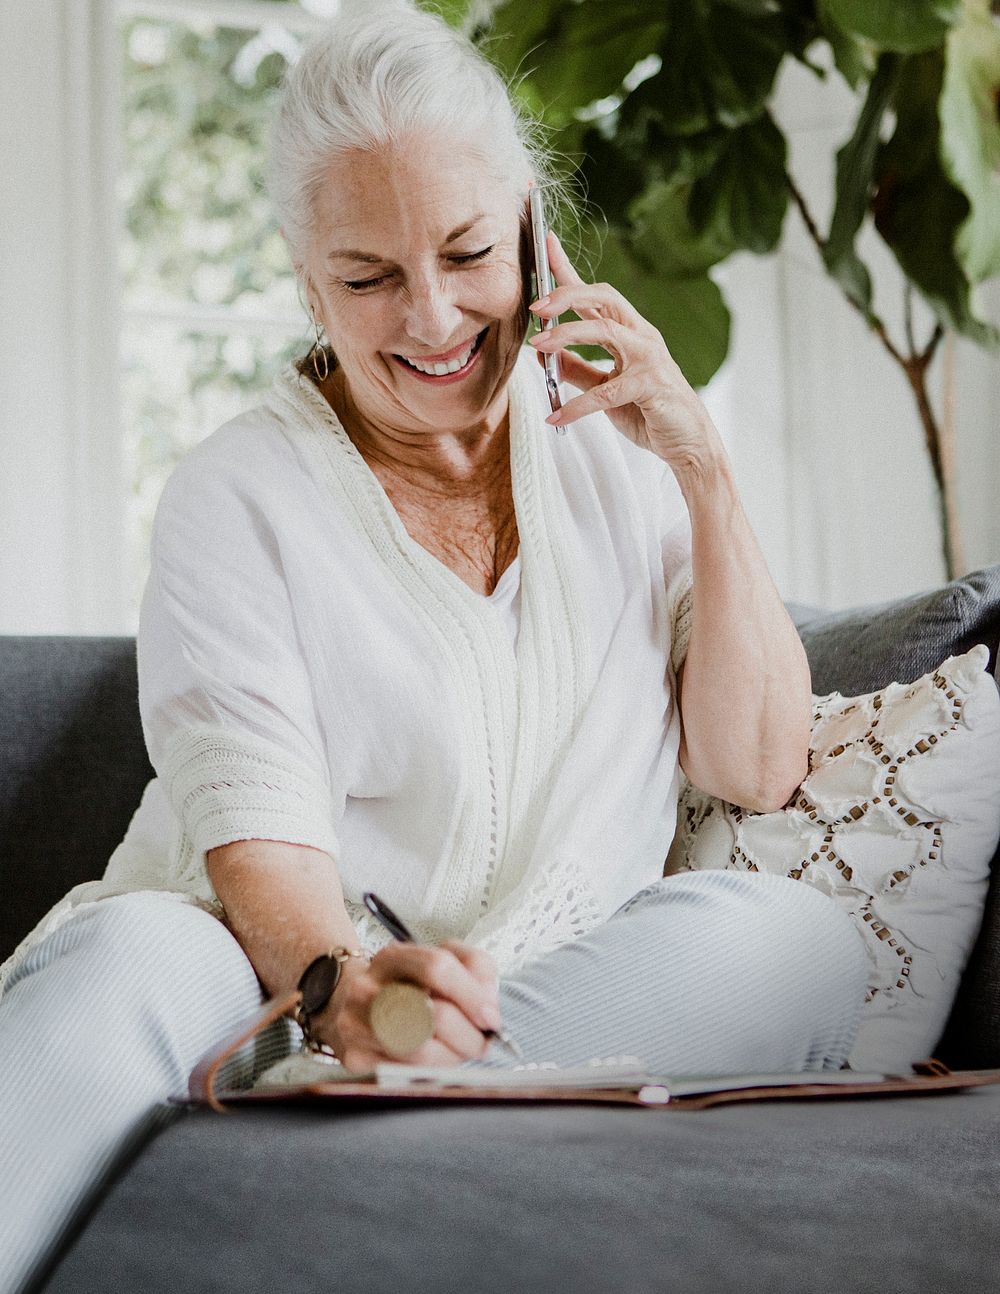 Senior businesswoman on a phone call writing on her planner at home